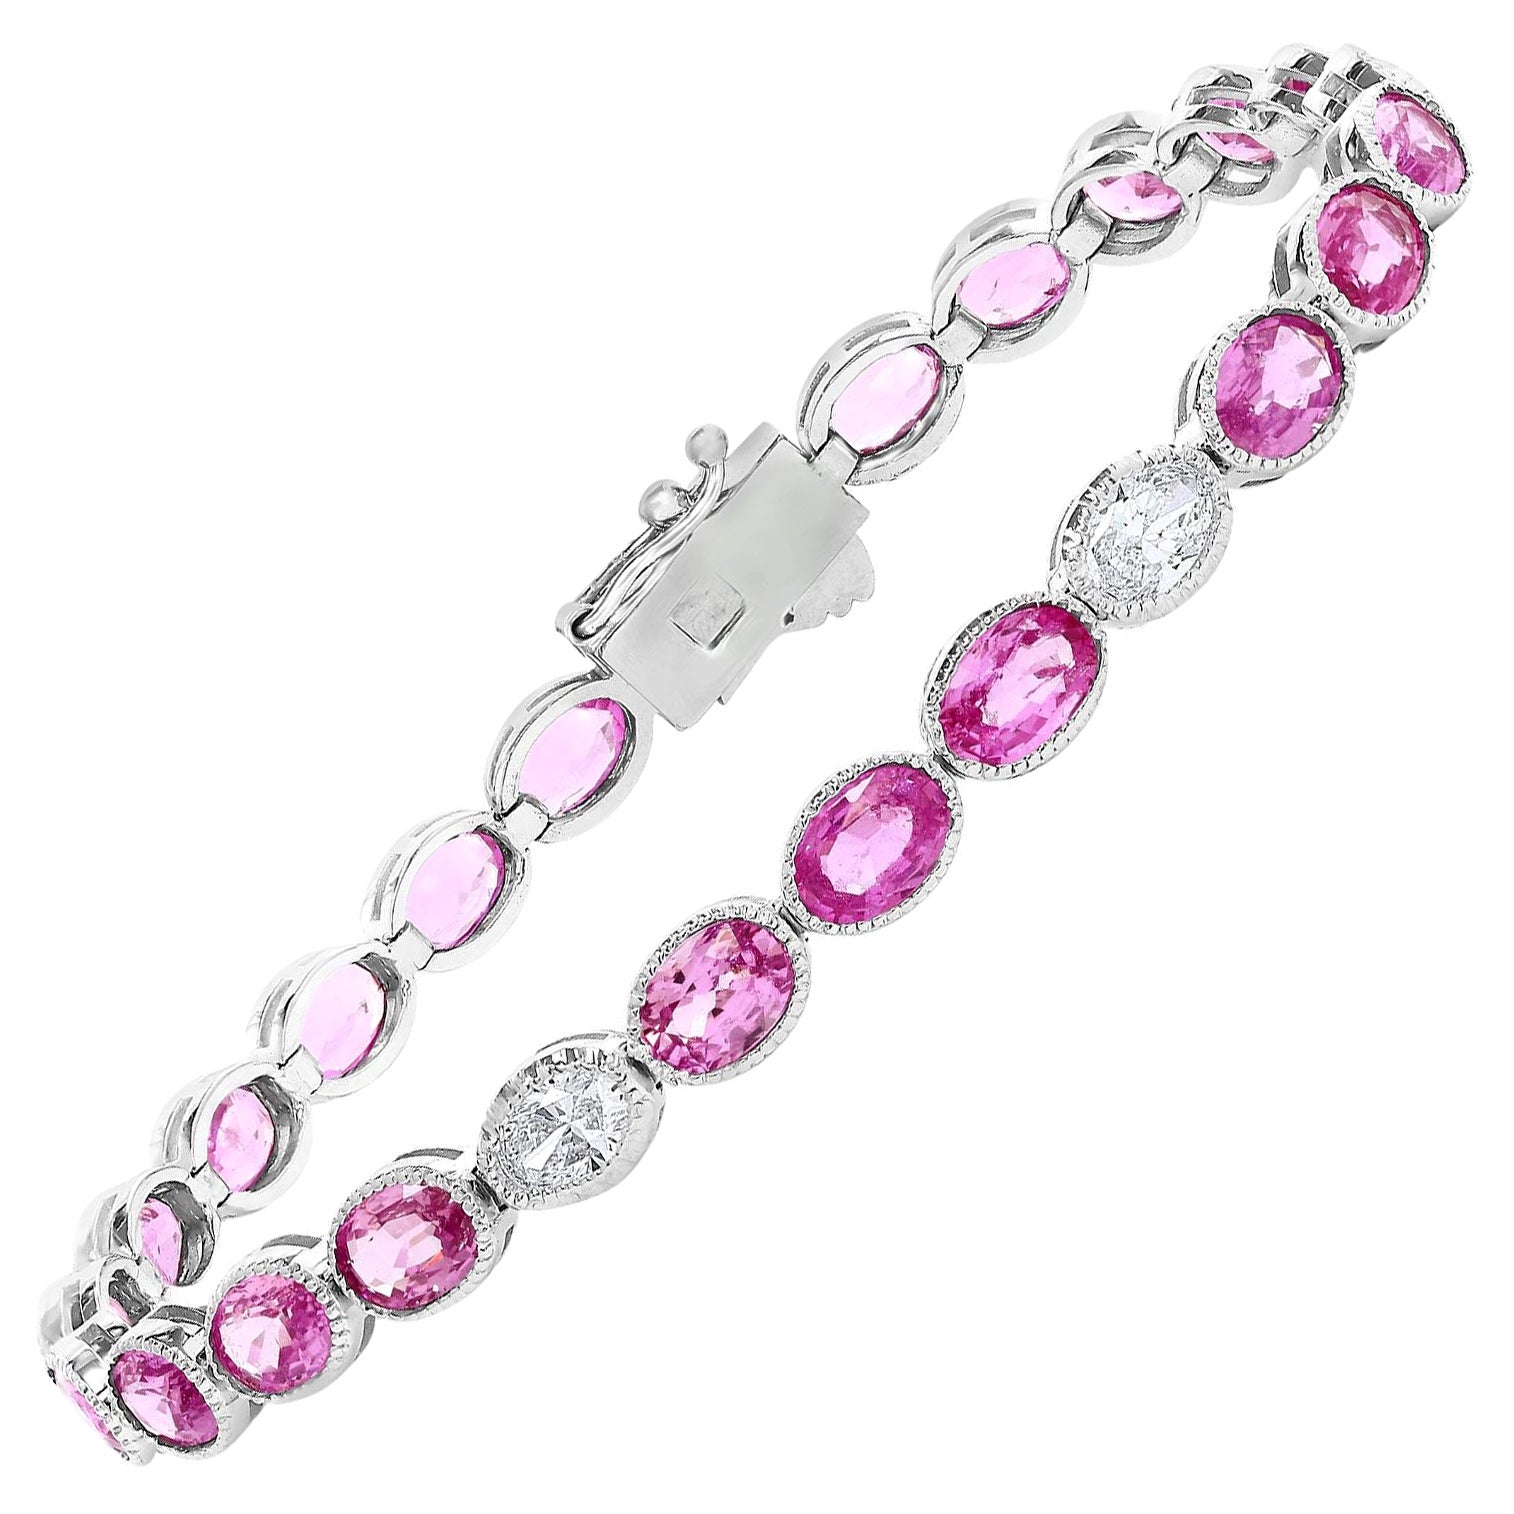 12.62 Carat Oval Cut Pink Sapphire and Diamond Tennis Bracelet in 14K White Gold